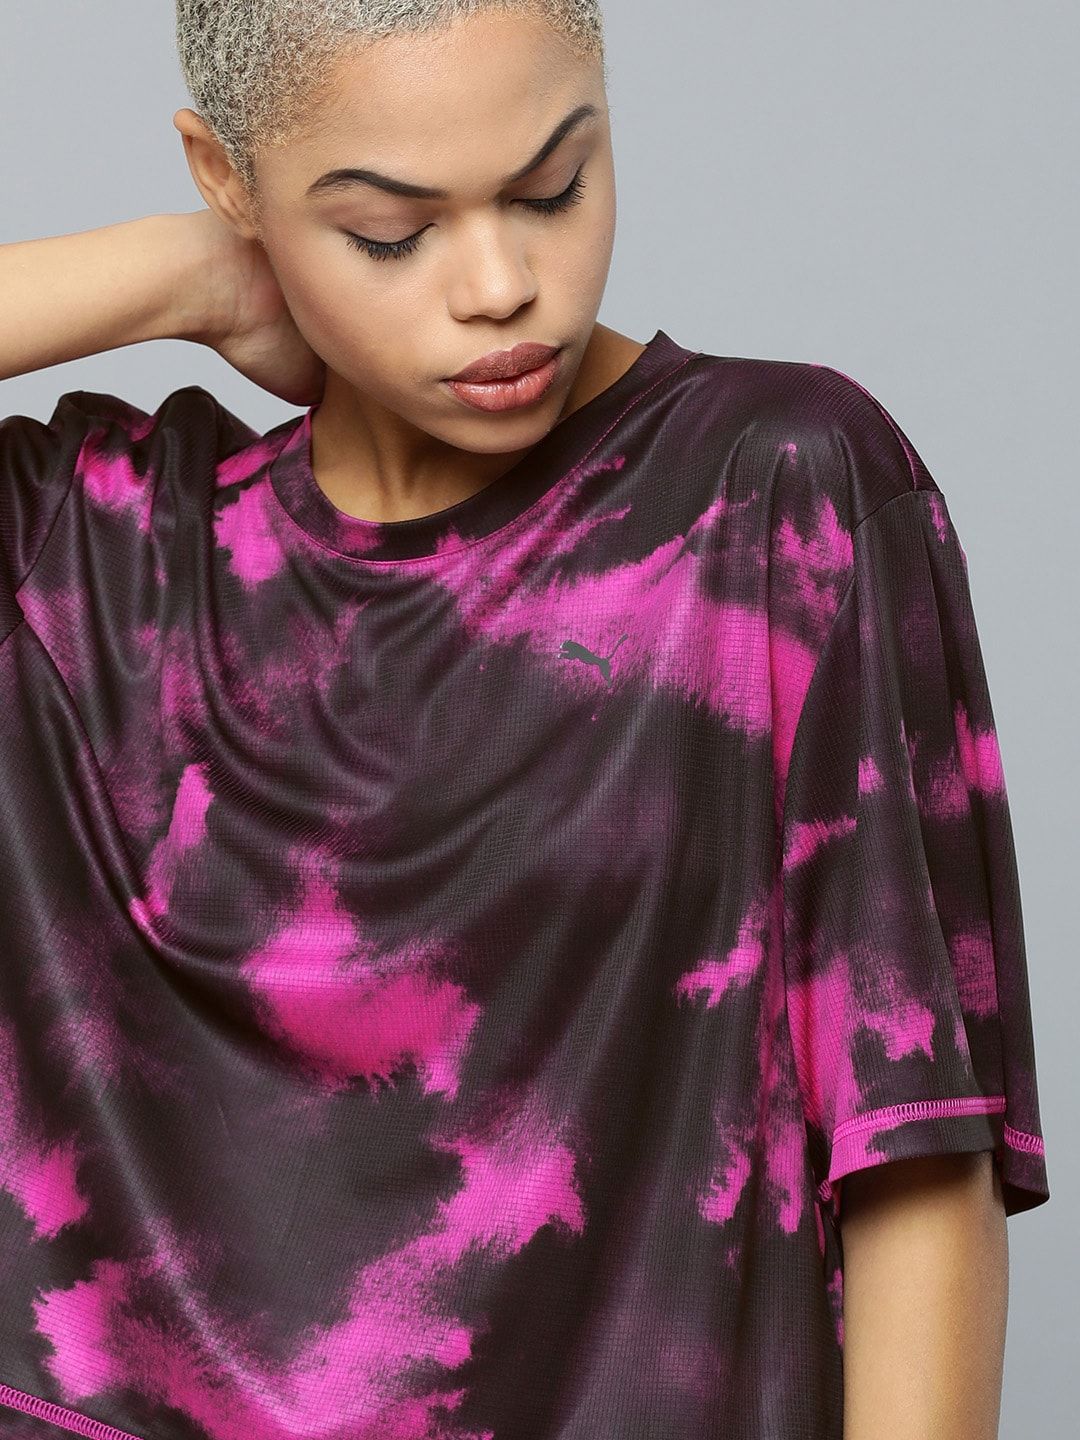 Puma Women Pink & Black Tie and Dye Training T-shirt Price in India